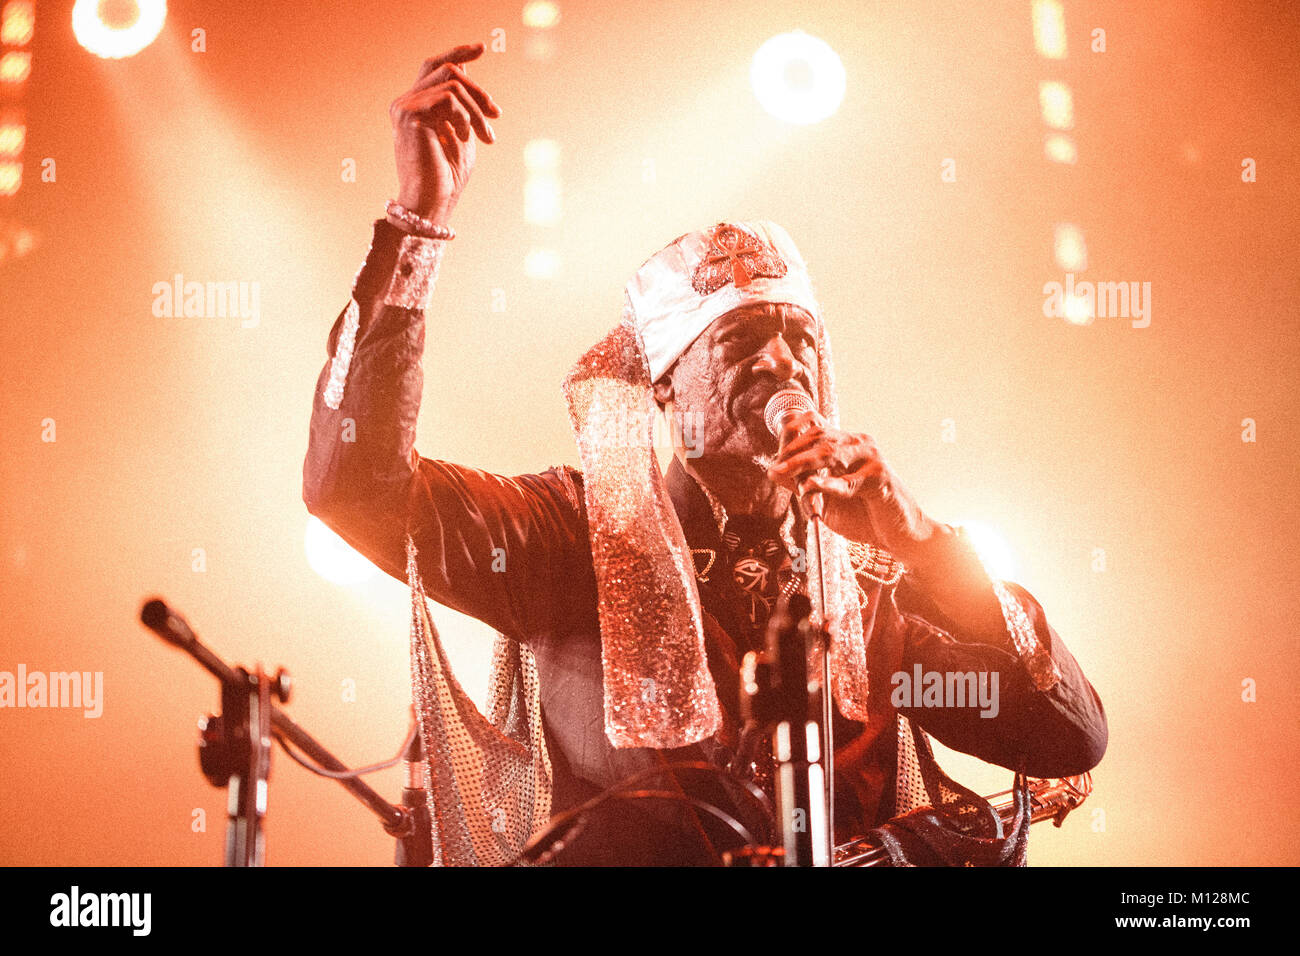 The American avant-garde jazz group Sun Ra Arkestra performs a live concert at the Polish music festival Off Festival 2015 in Katowice. Here musician Knoel Scott is pictured live on stage. Poland, 08/08 2015. Stock Photo